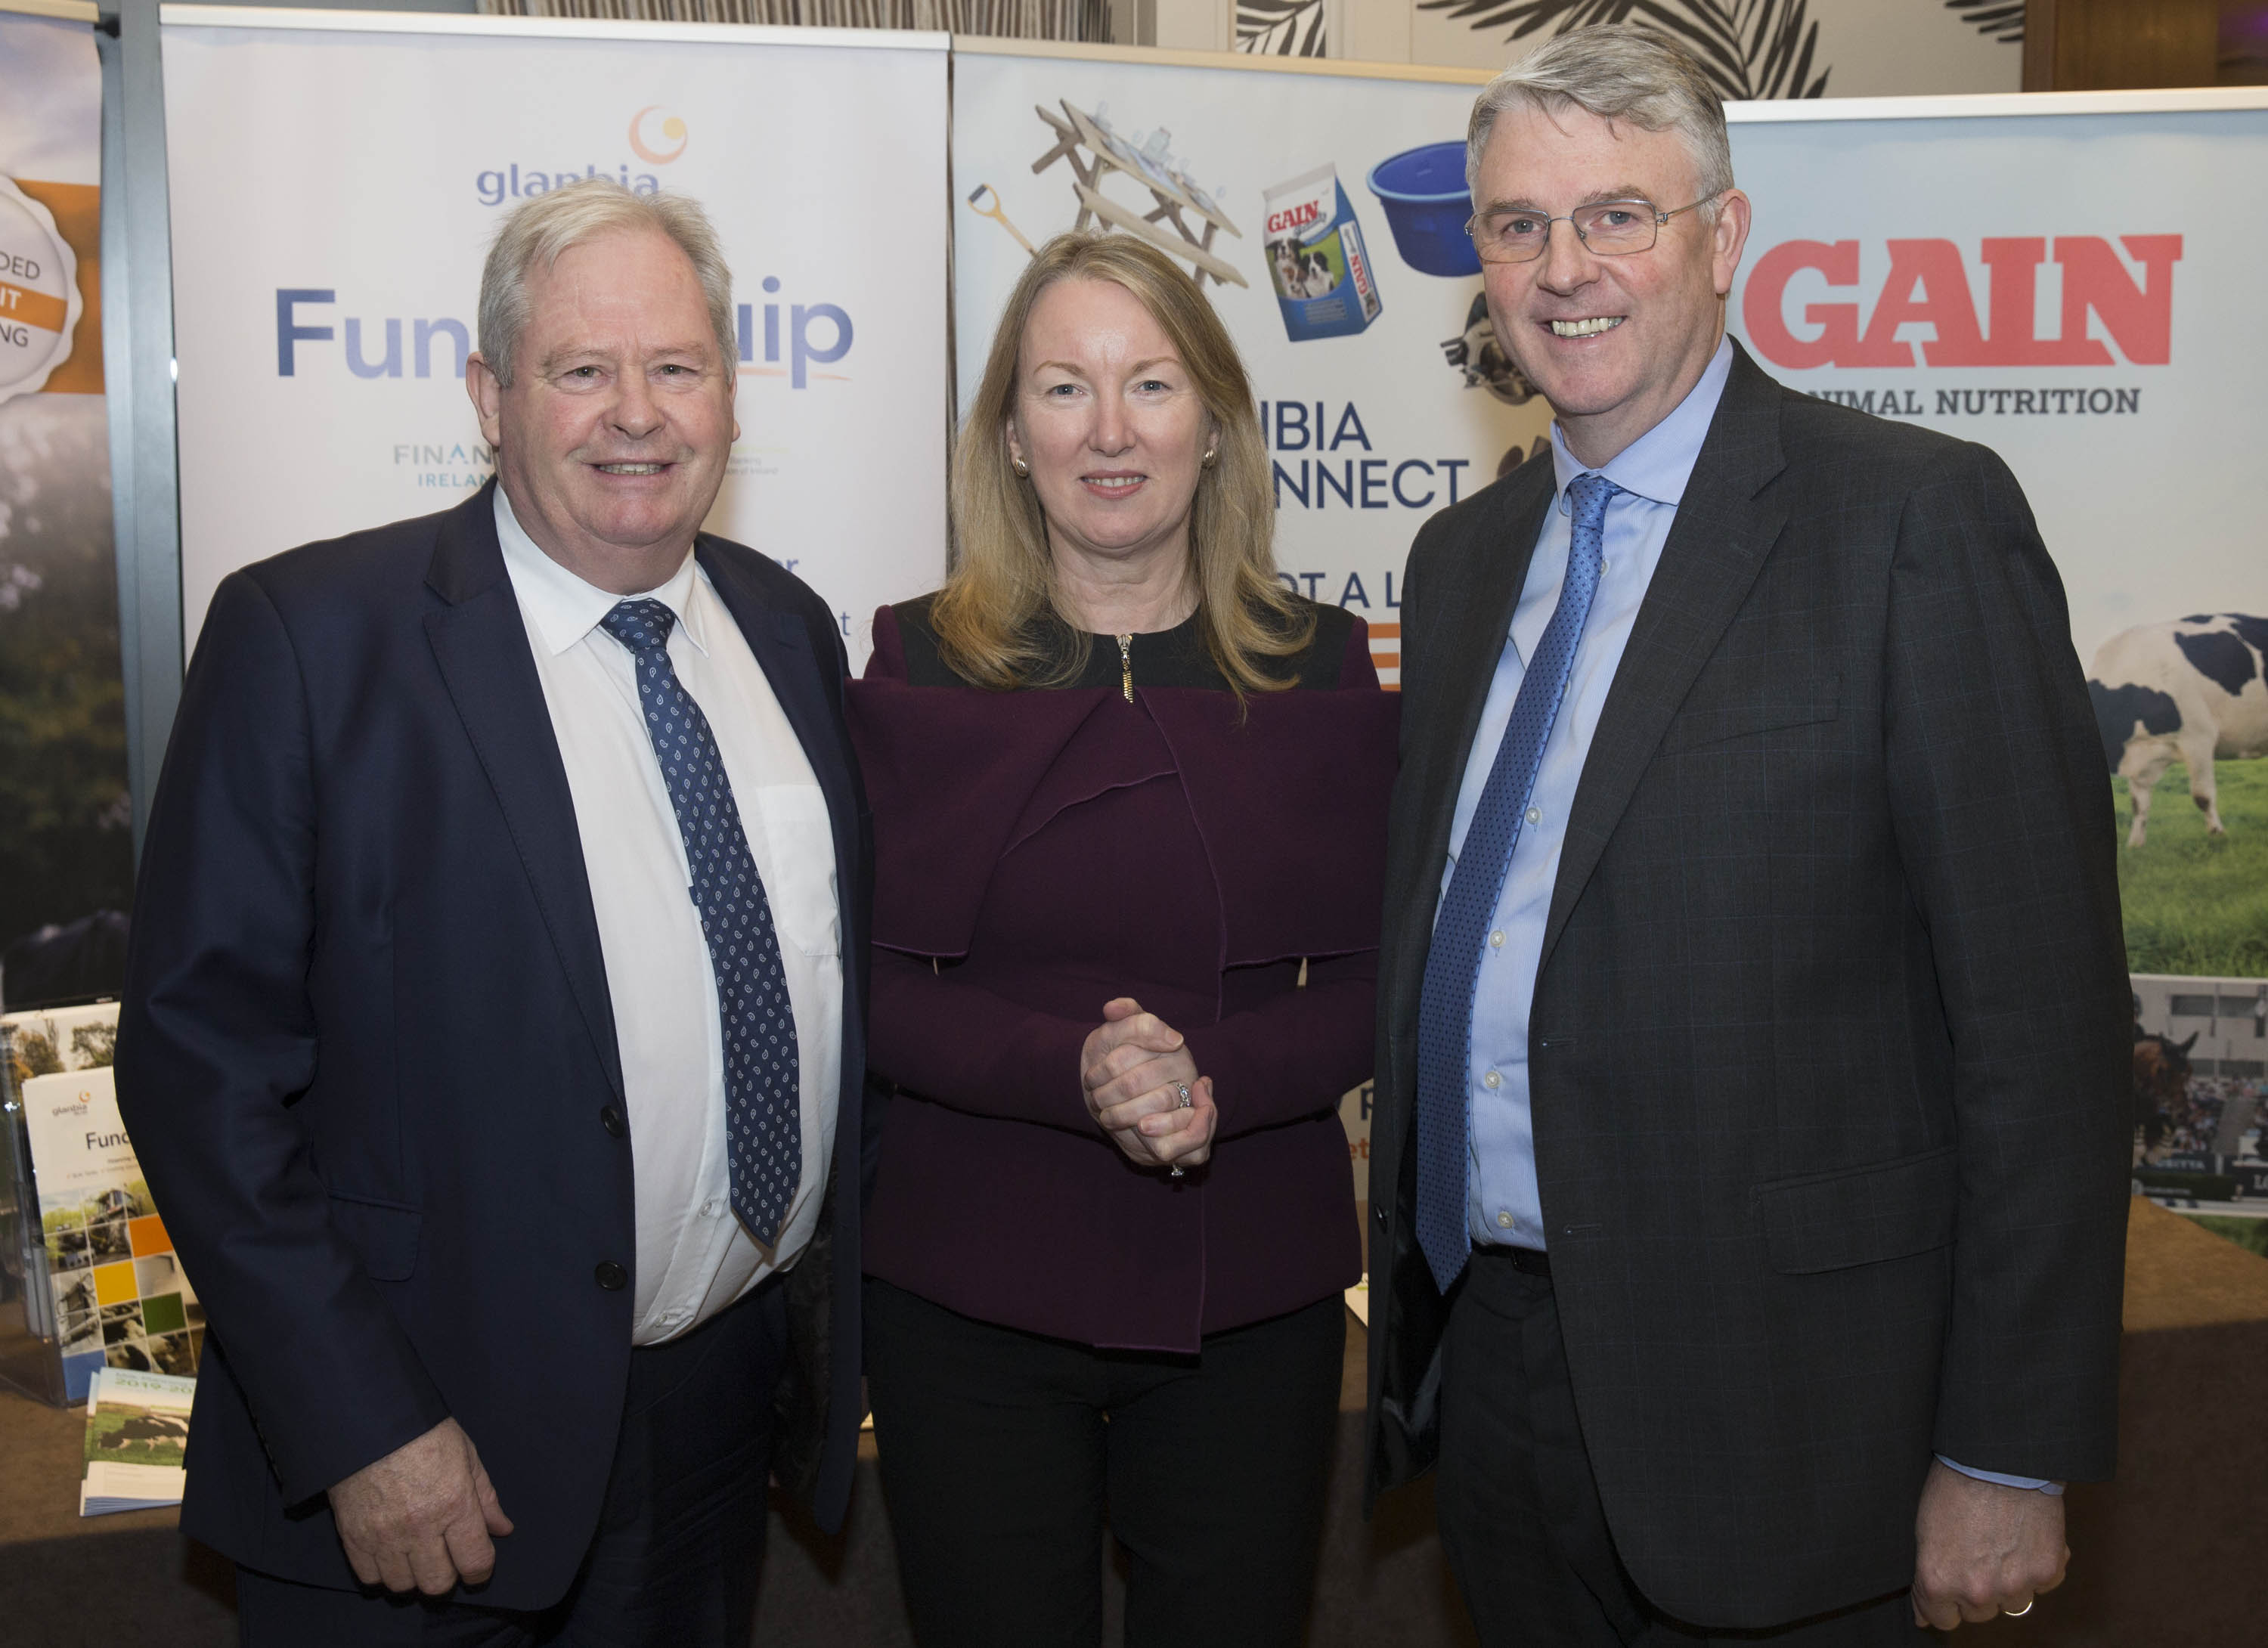 In Pictures: Glanbia Information Evening in Portlaoise - Laois Today